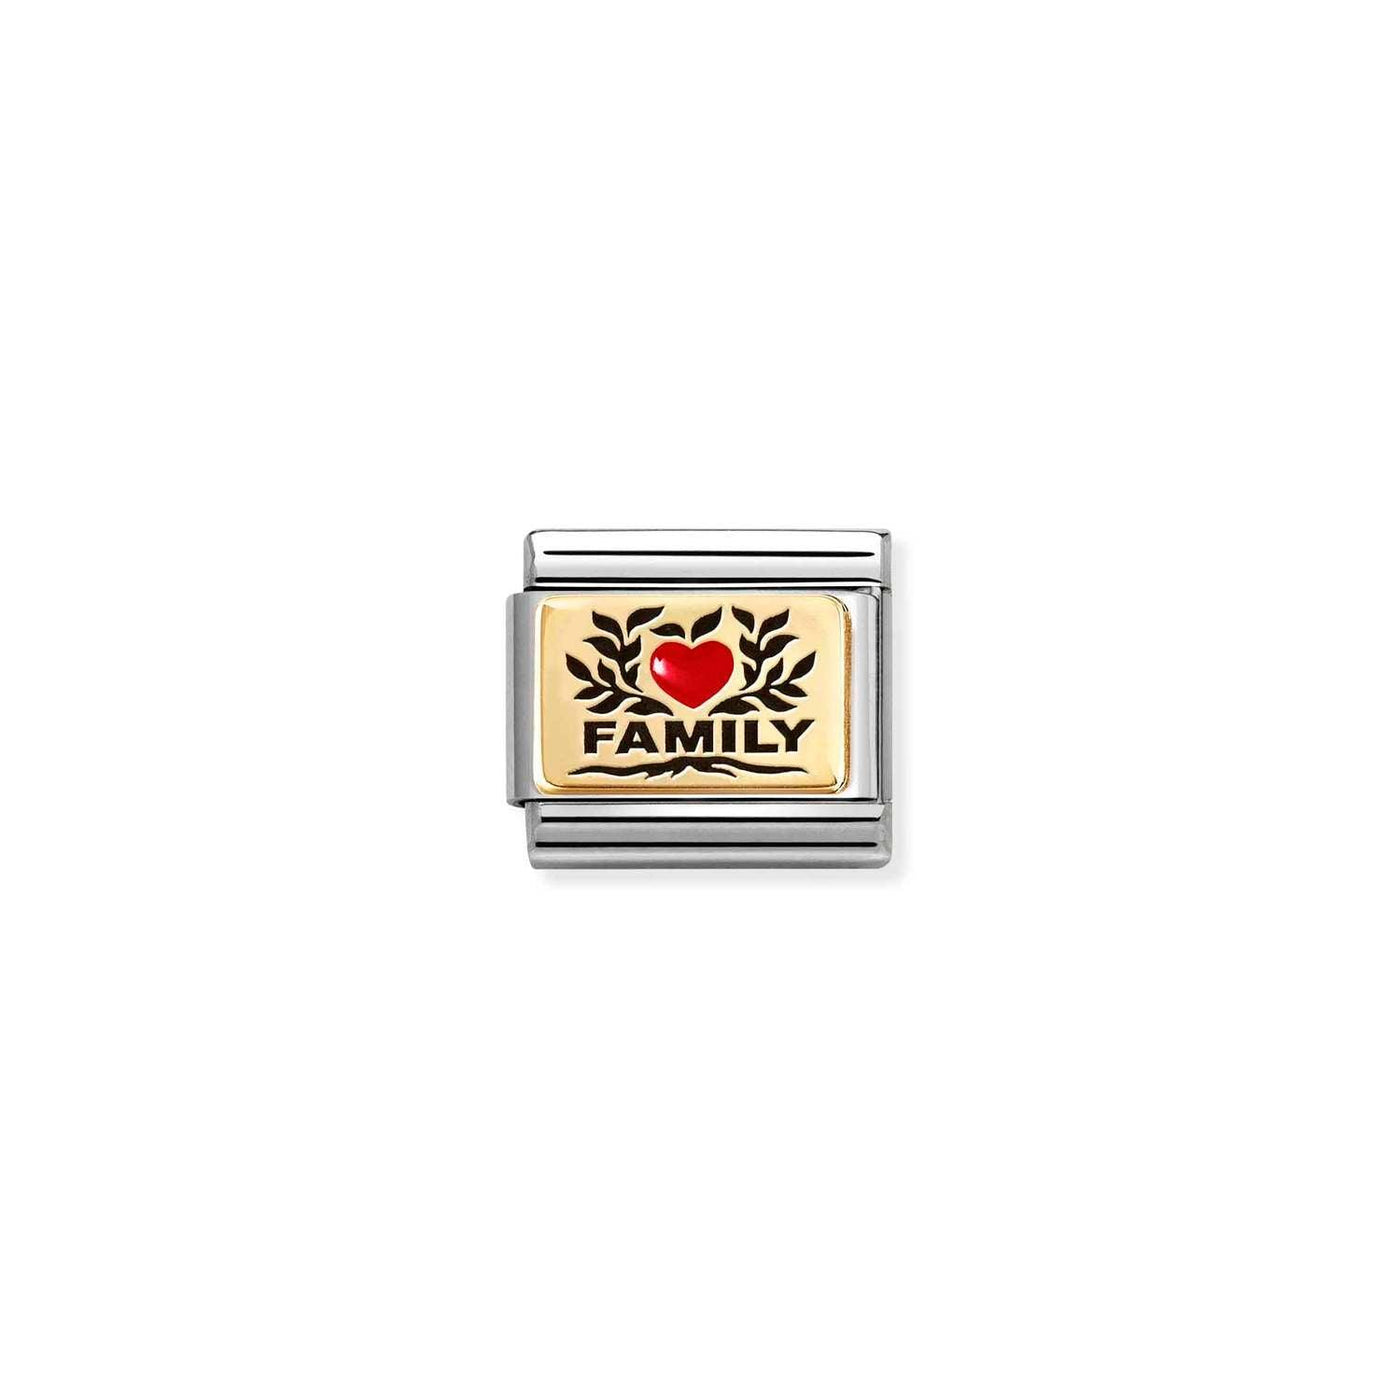 Nomination Classic Gold and Enamel Family Red Heart Charm